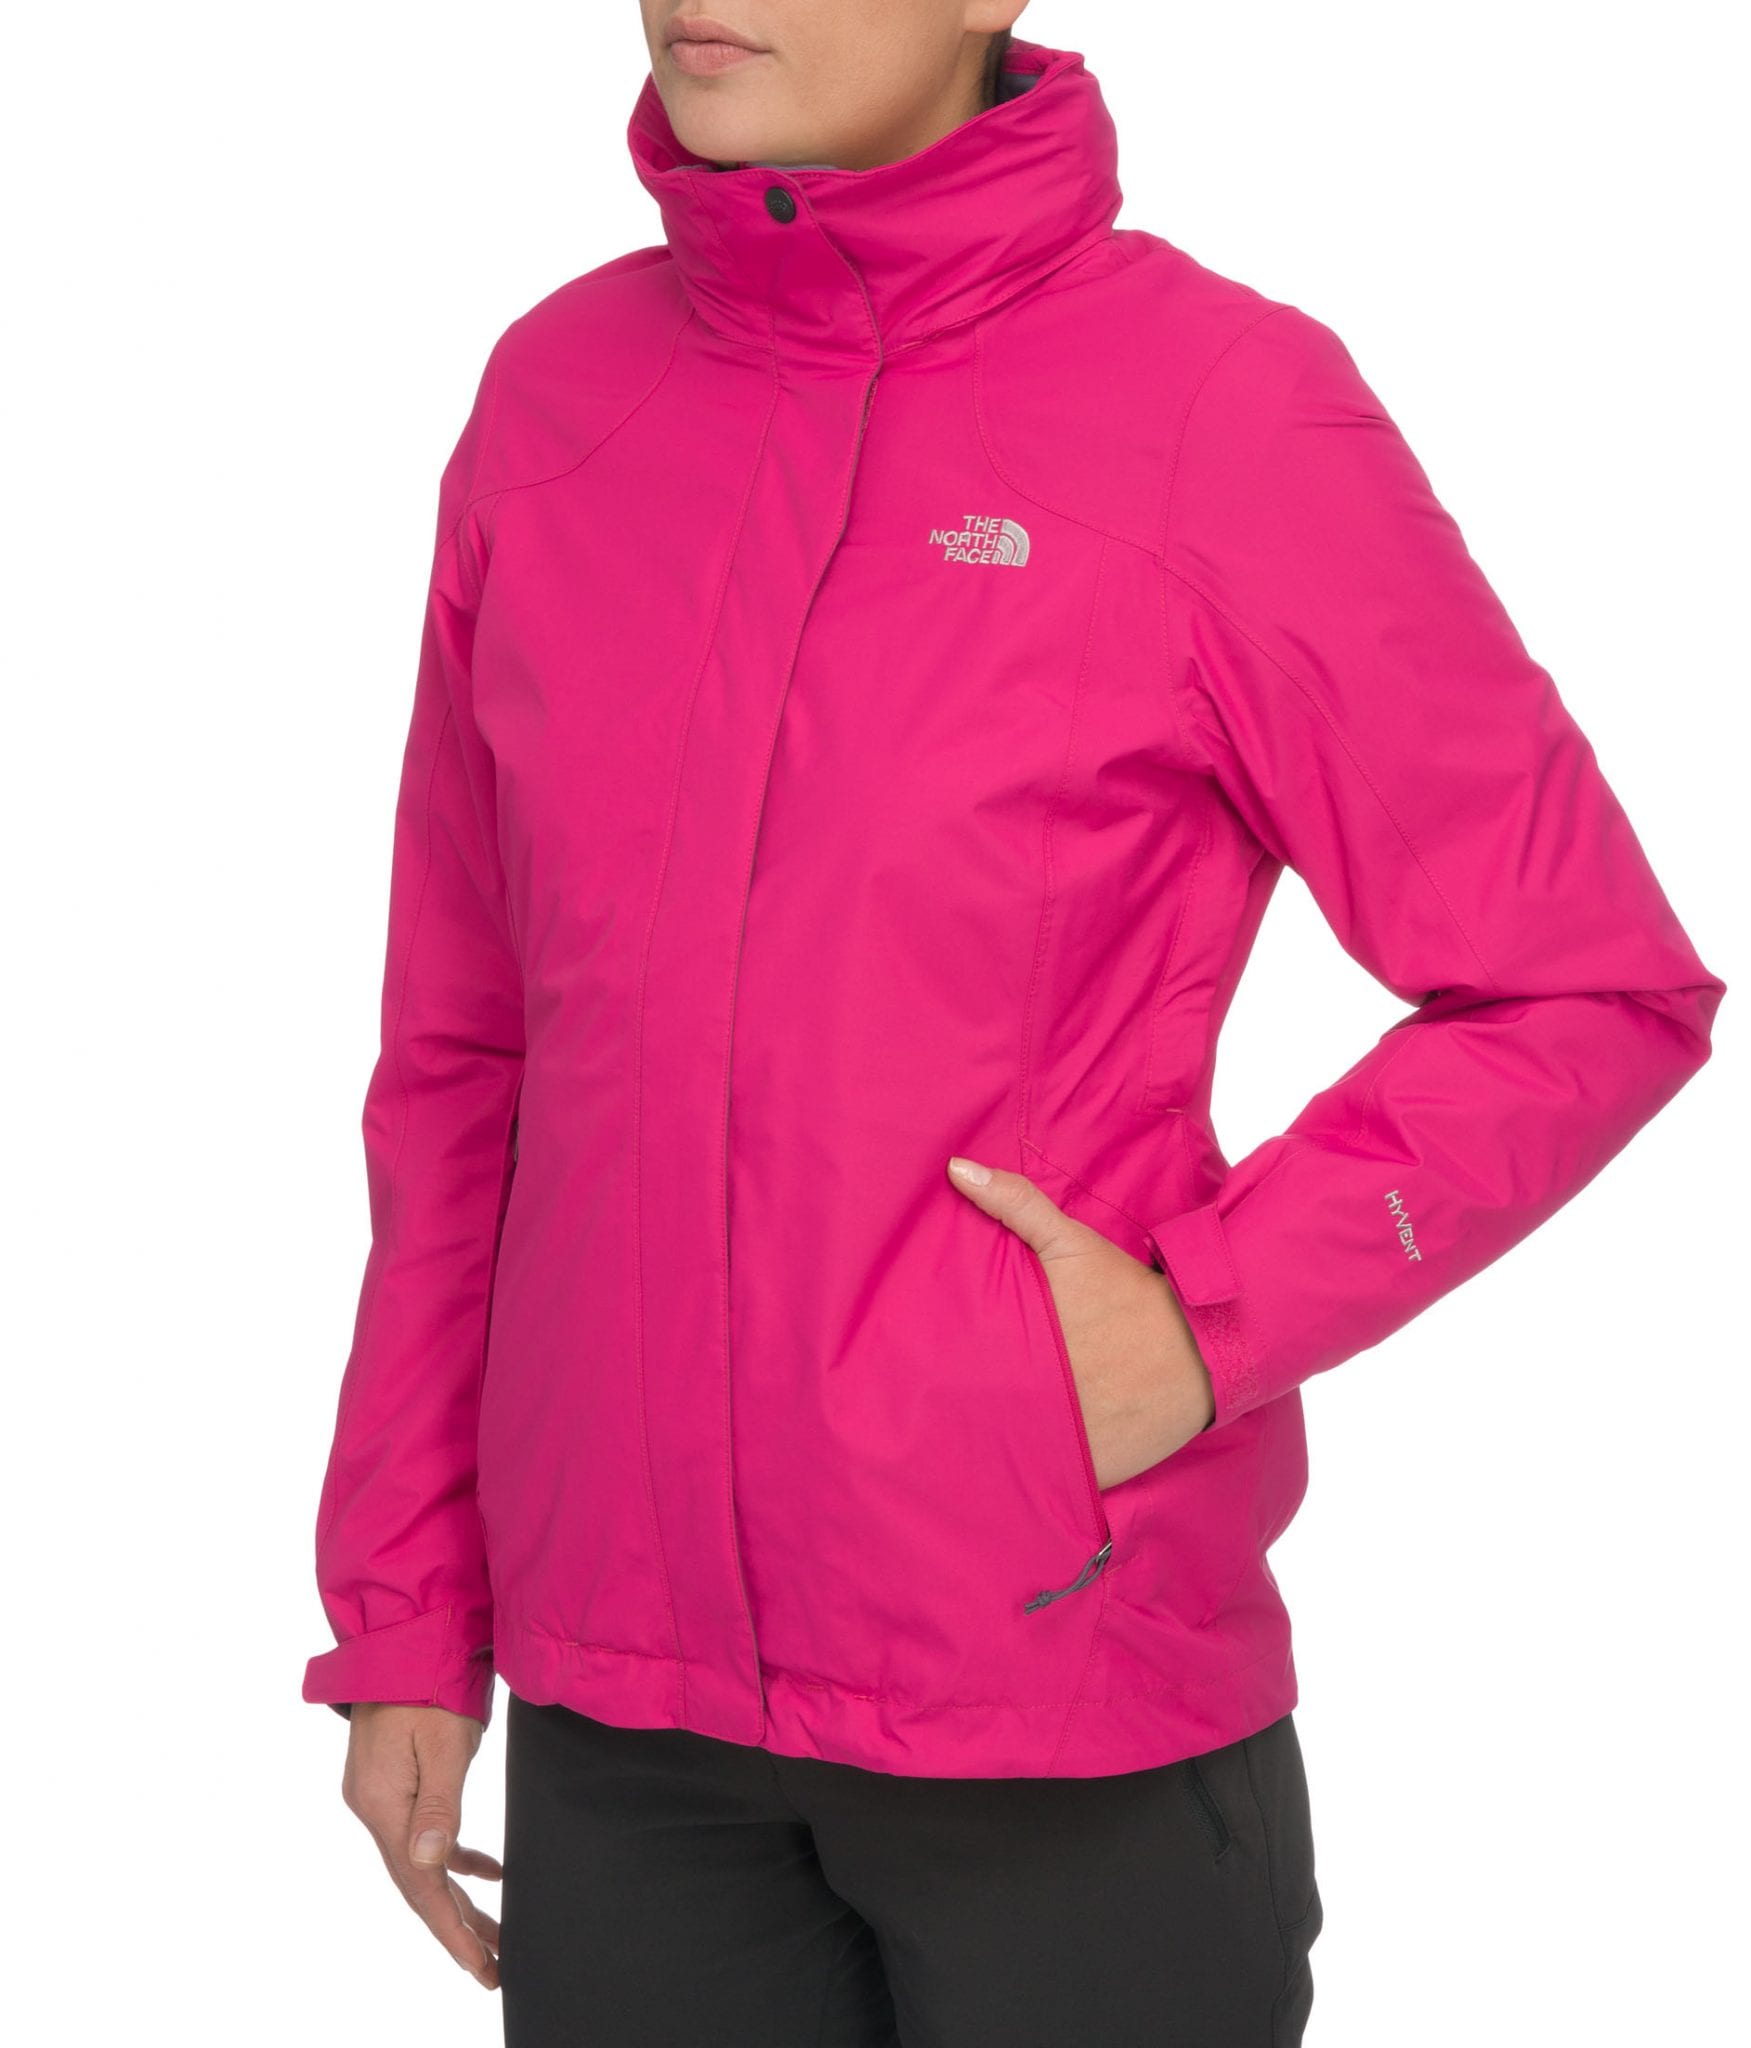 The North Face : W Evolution II triclimate jacket – Passion pink | o